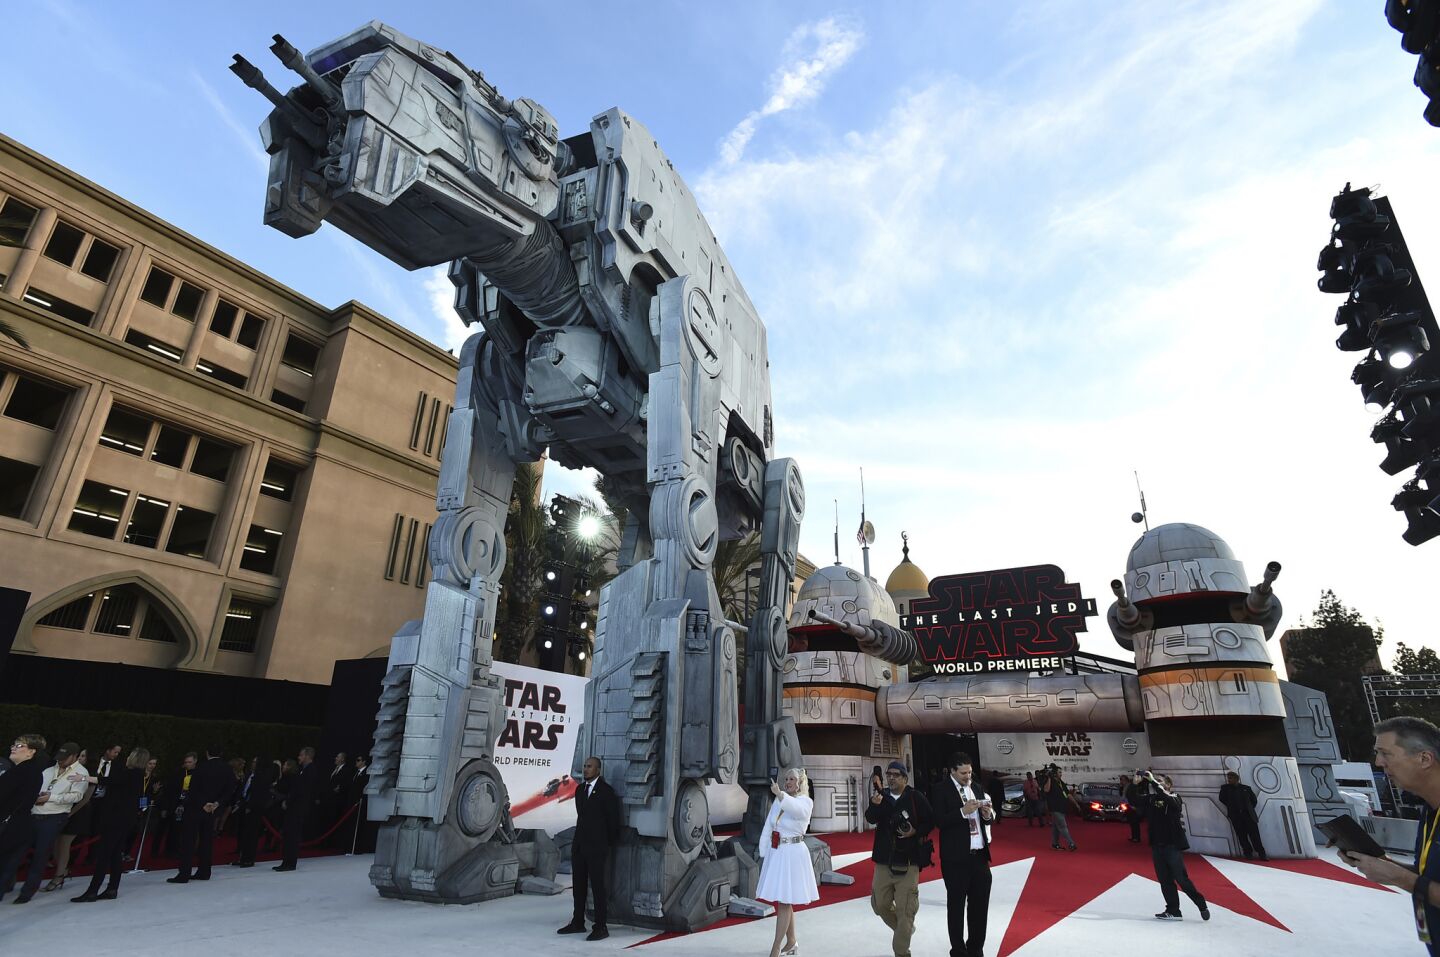 A general view of atmosphere at the Los Angeles premiere of "Star Wars: The Last Jedi" at the Shrine Auditorium in Los Angeles.